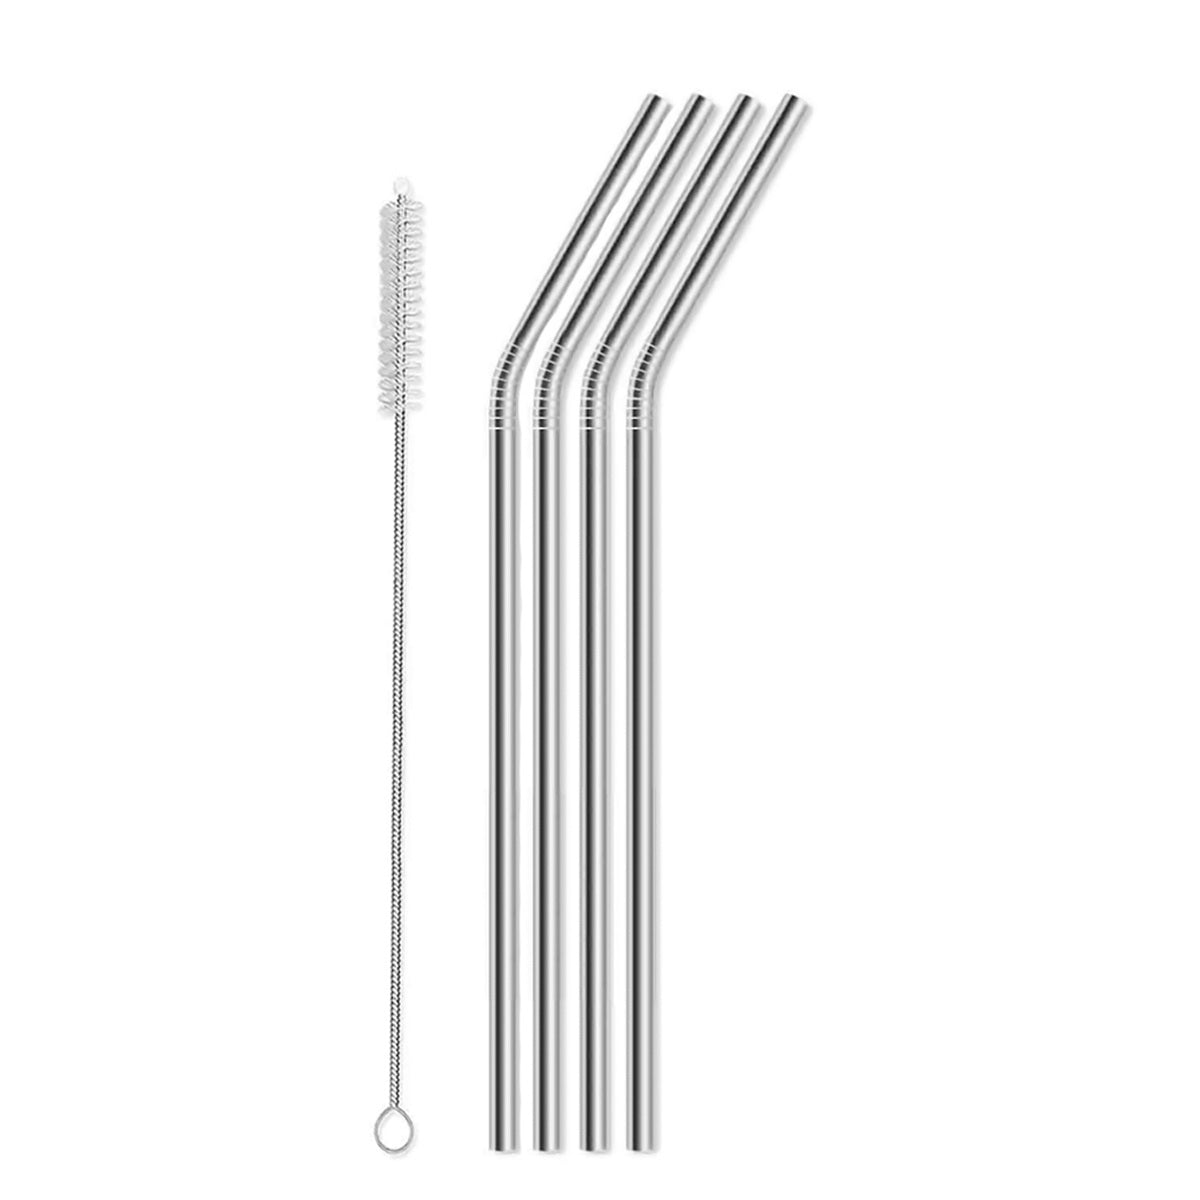 Stainless Steel Drinking Metal Straws 4 Bent for Kids and Adults